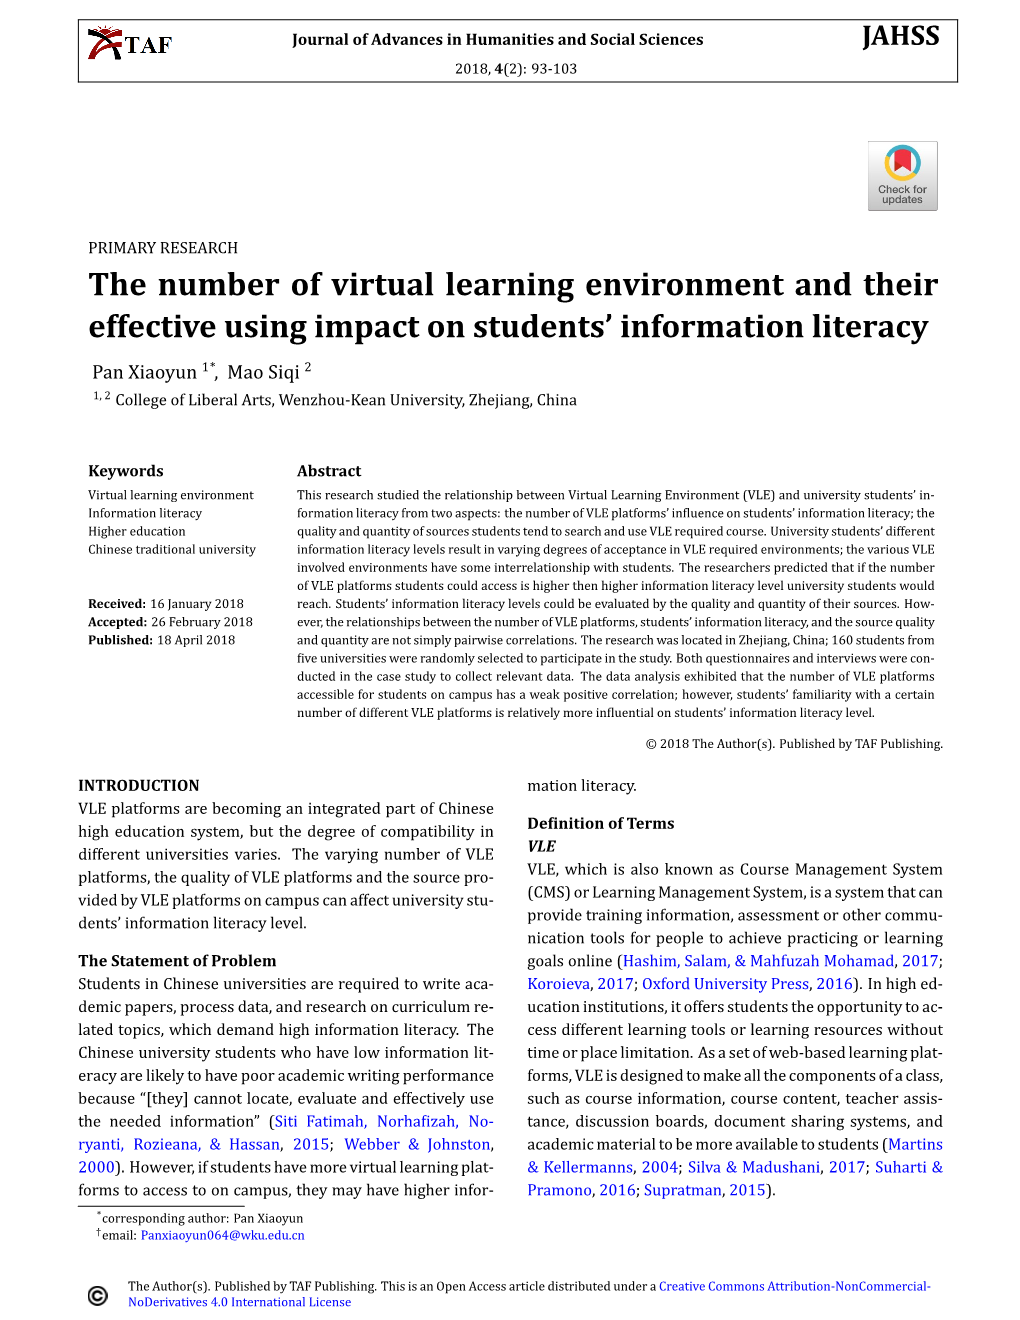 The Number of Virtual Learning Environment and Their Effective